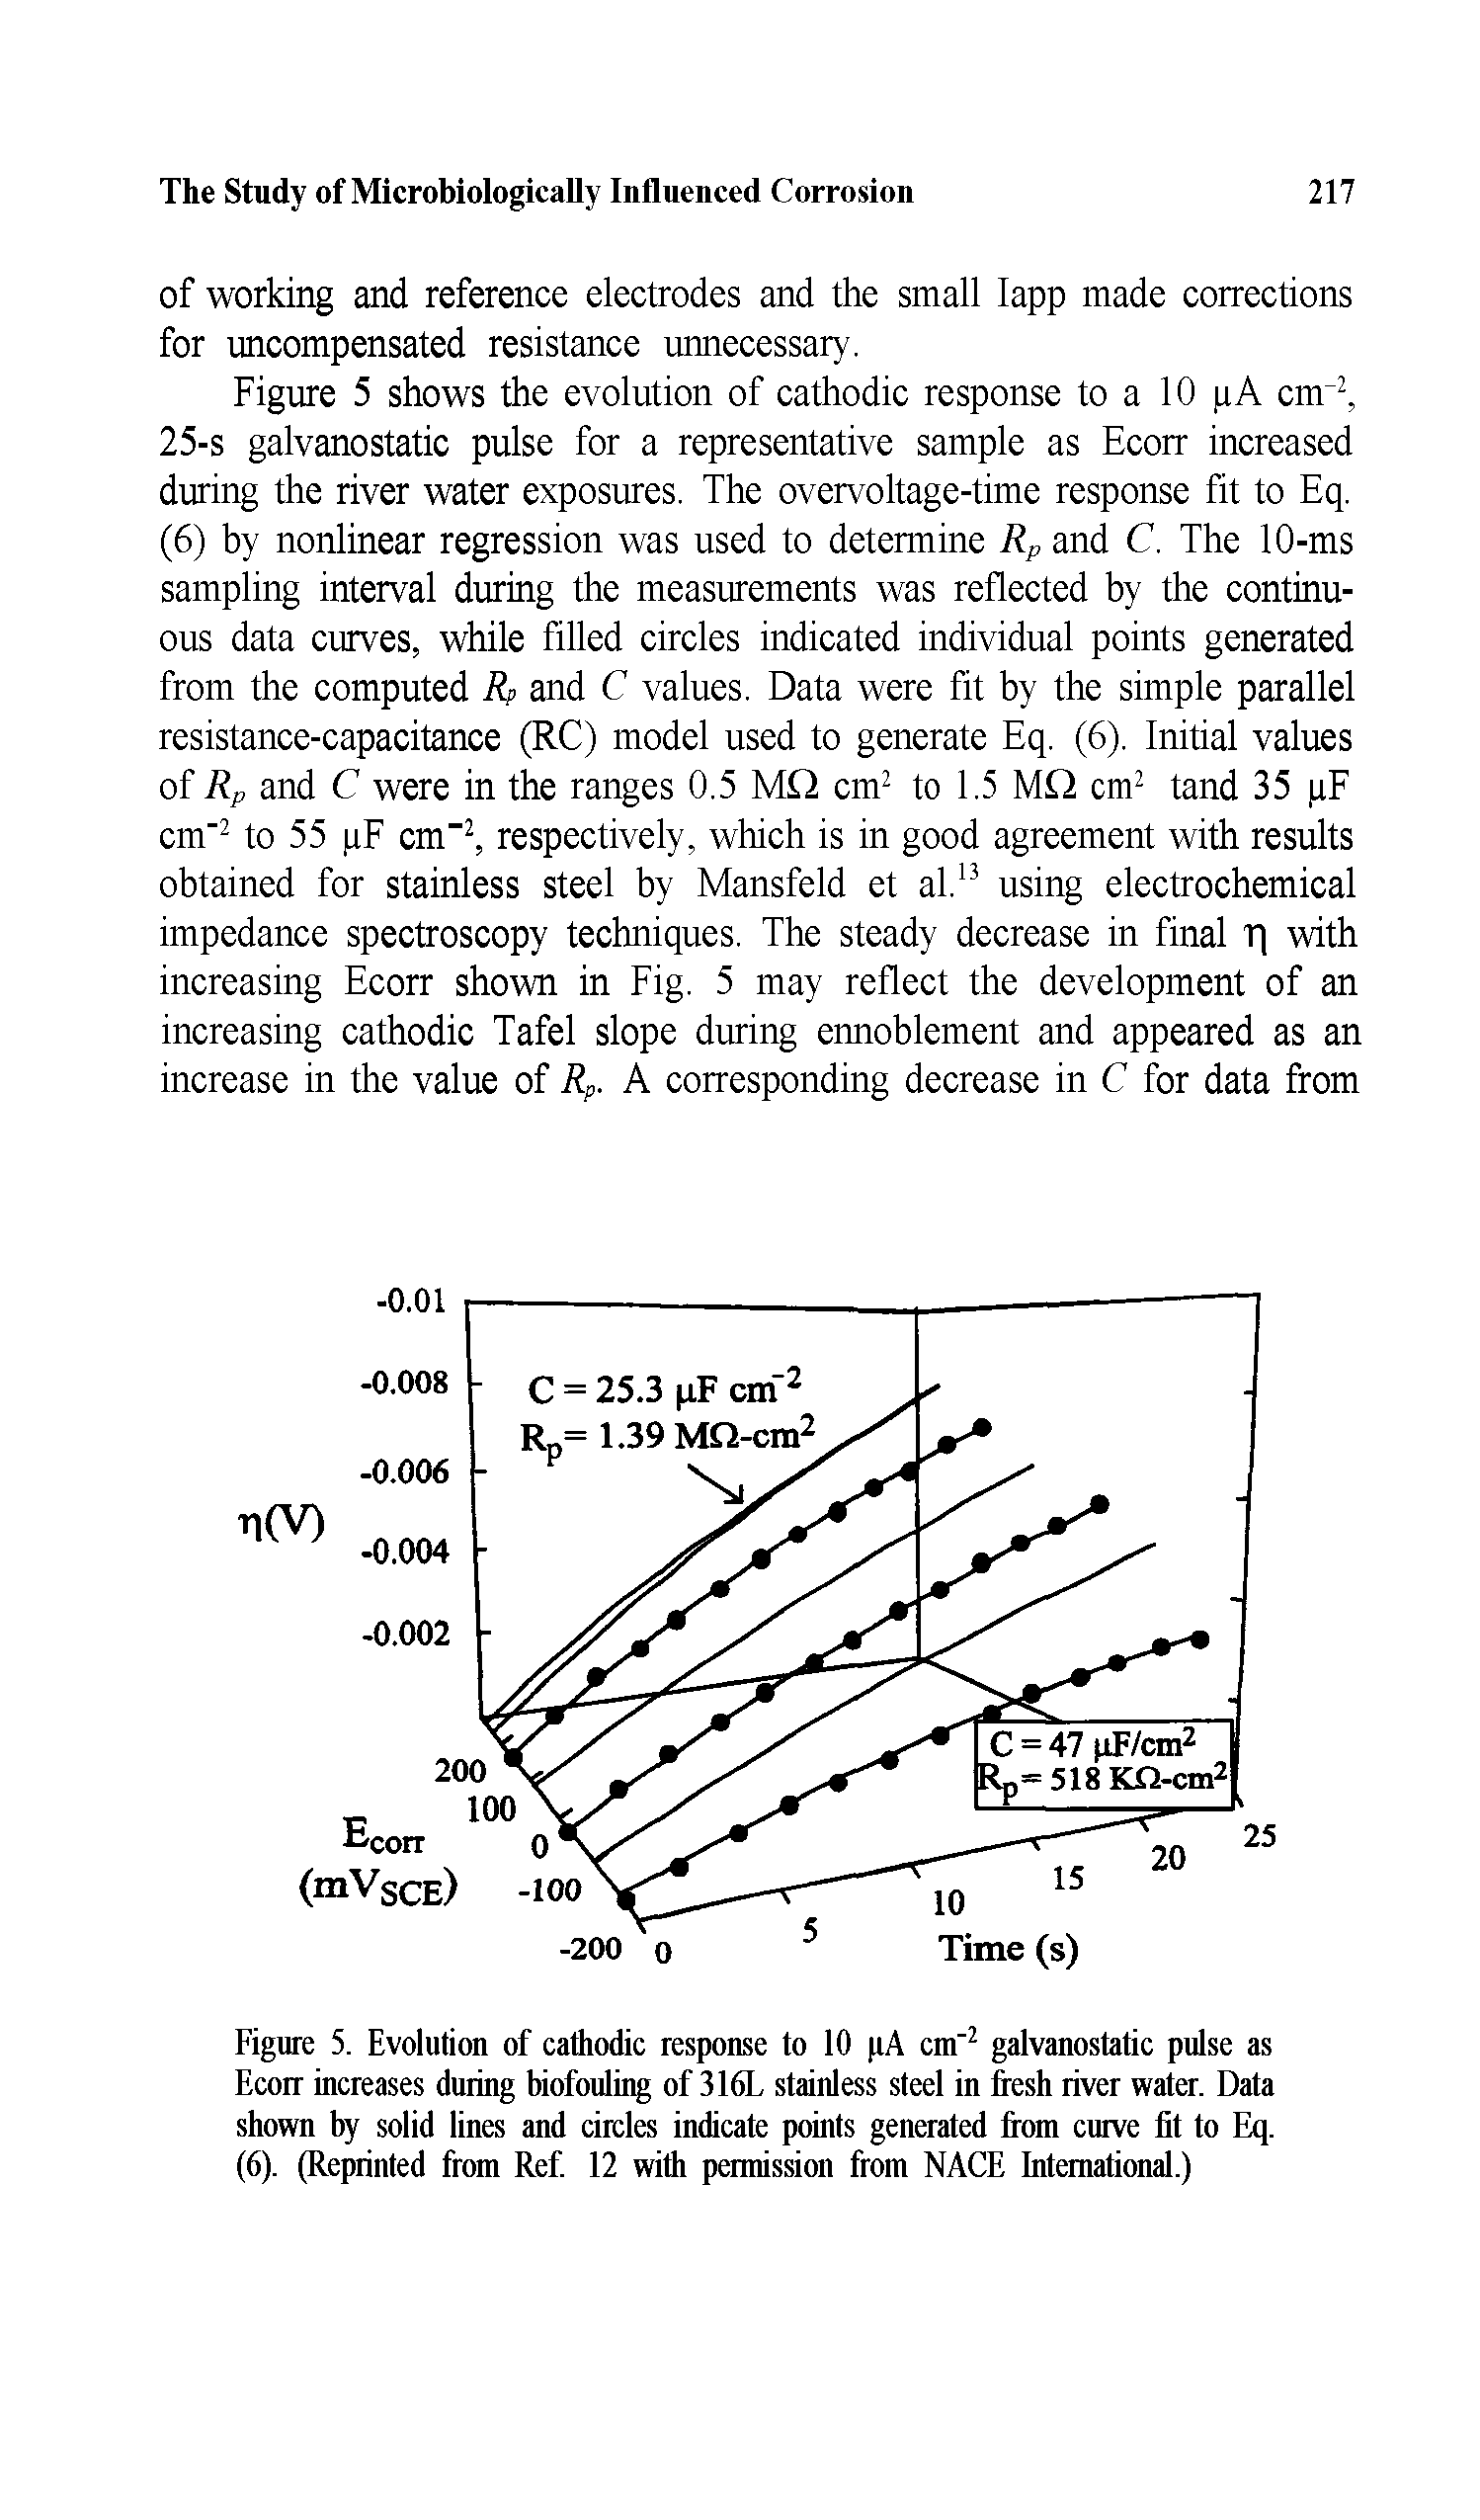 Figure 5. Evolution of cathodic response to 10 pA cm" galvanostatic pulse as Ecorr increases during biofouling of 316L stainless steel in fresh river water. Data shown by solid lines and circles indicate points generated from curve lit to Eq. (6). (Reprinted from Ref. 12 with permission from NACE International.)...